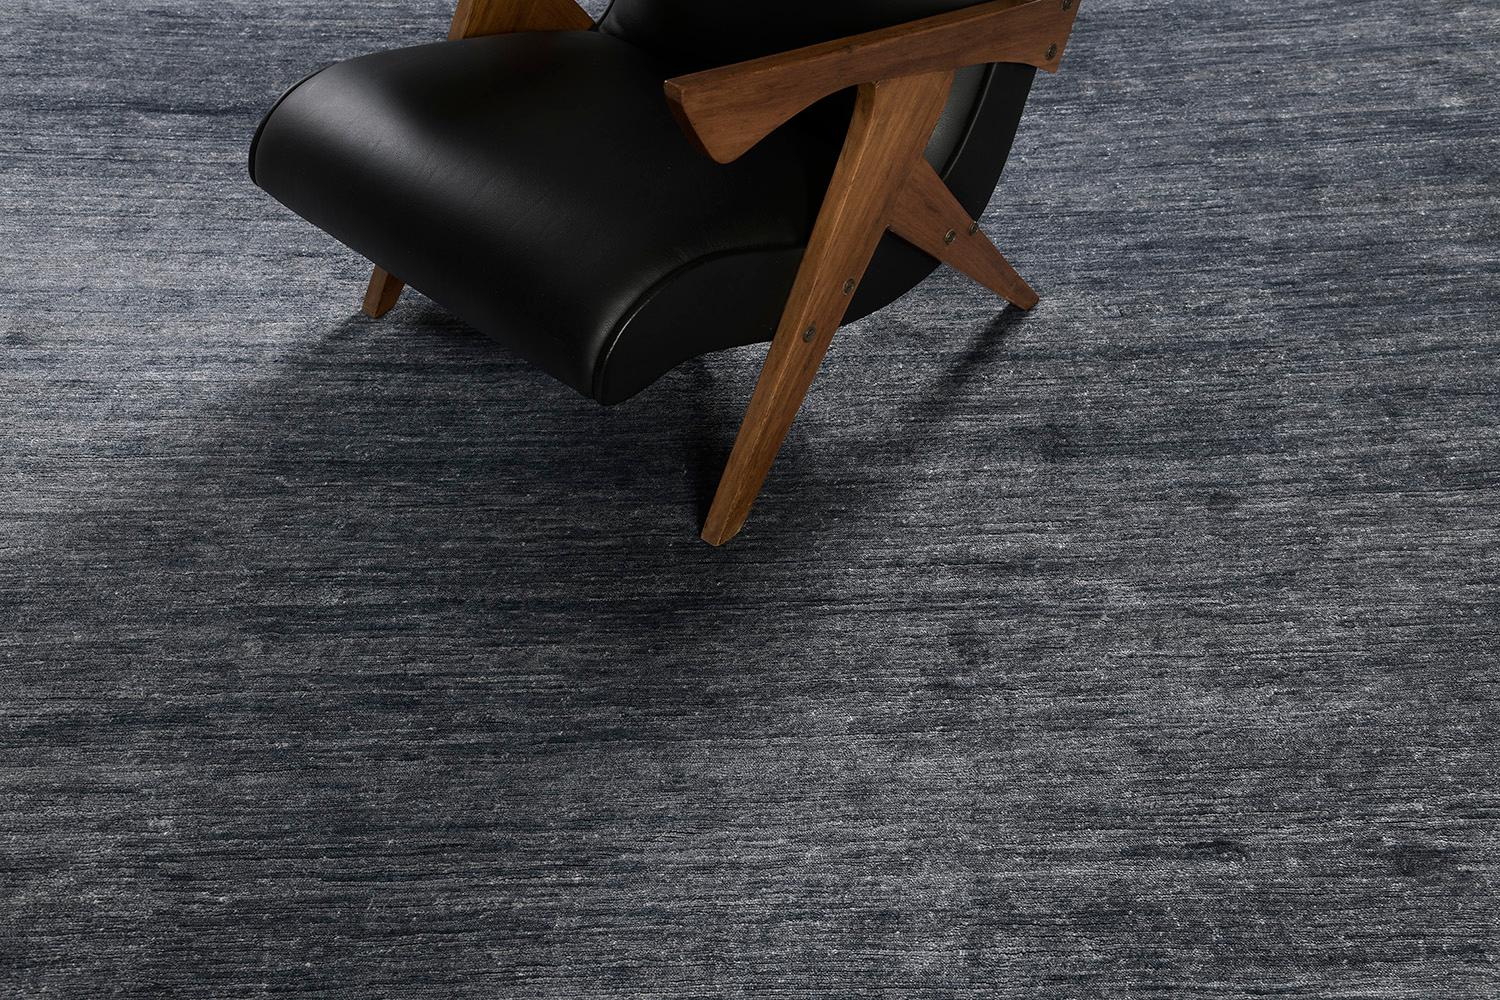 Dara' is a sought-after rug in Elan Collection in the mesmerizing shade of midnight blue. Its simplicity does not take away from the rug's luxurious quality and beautiful sheen made of bamboo silk. Dara is a fabulous rug for any design